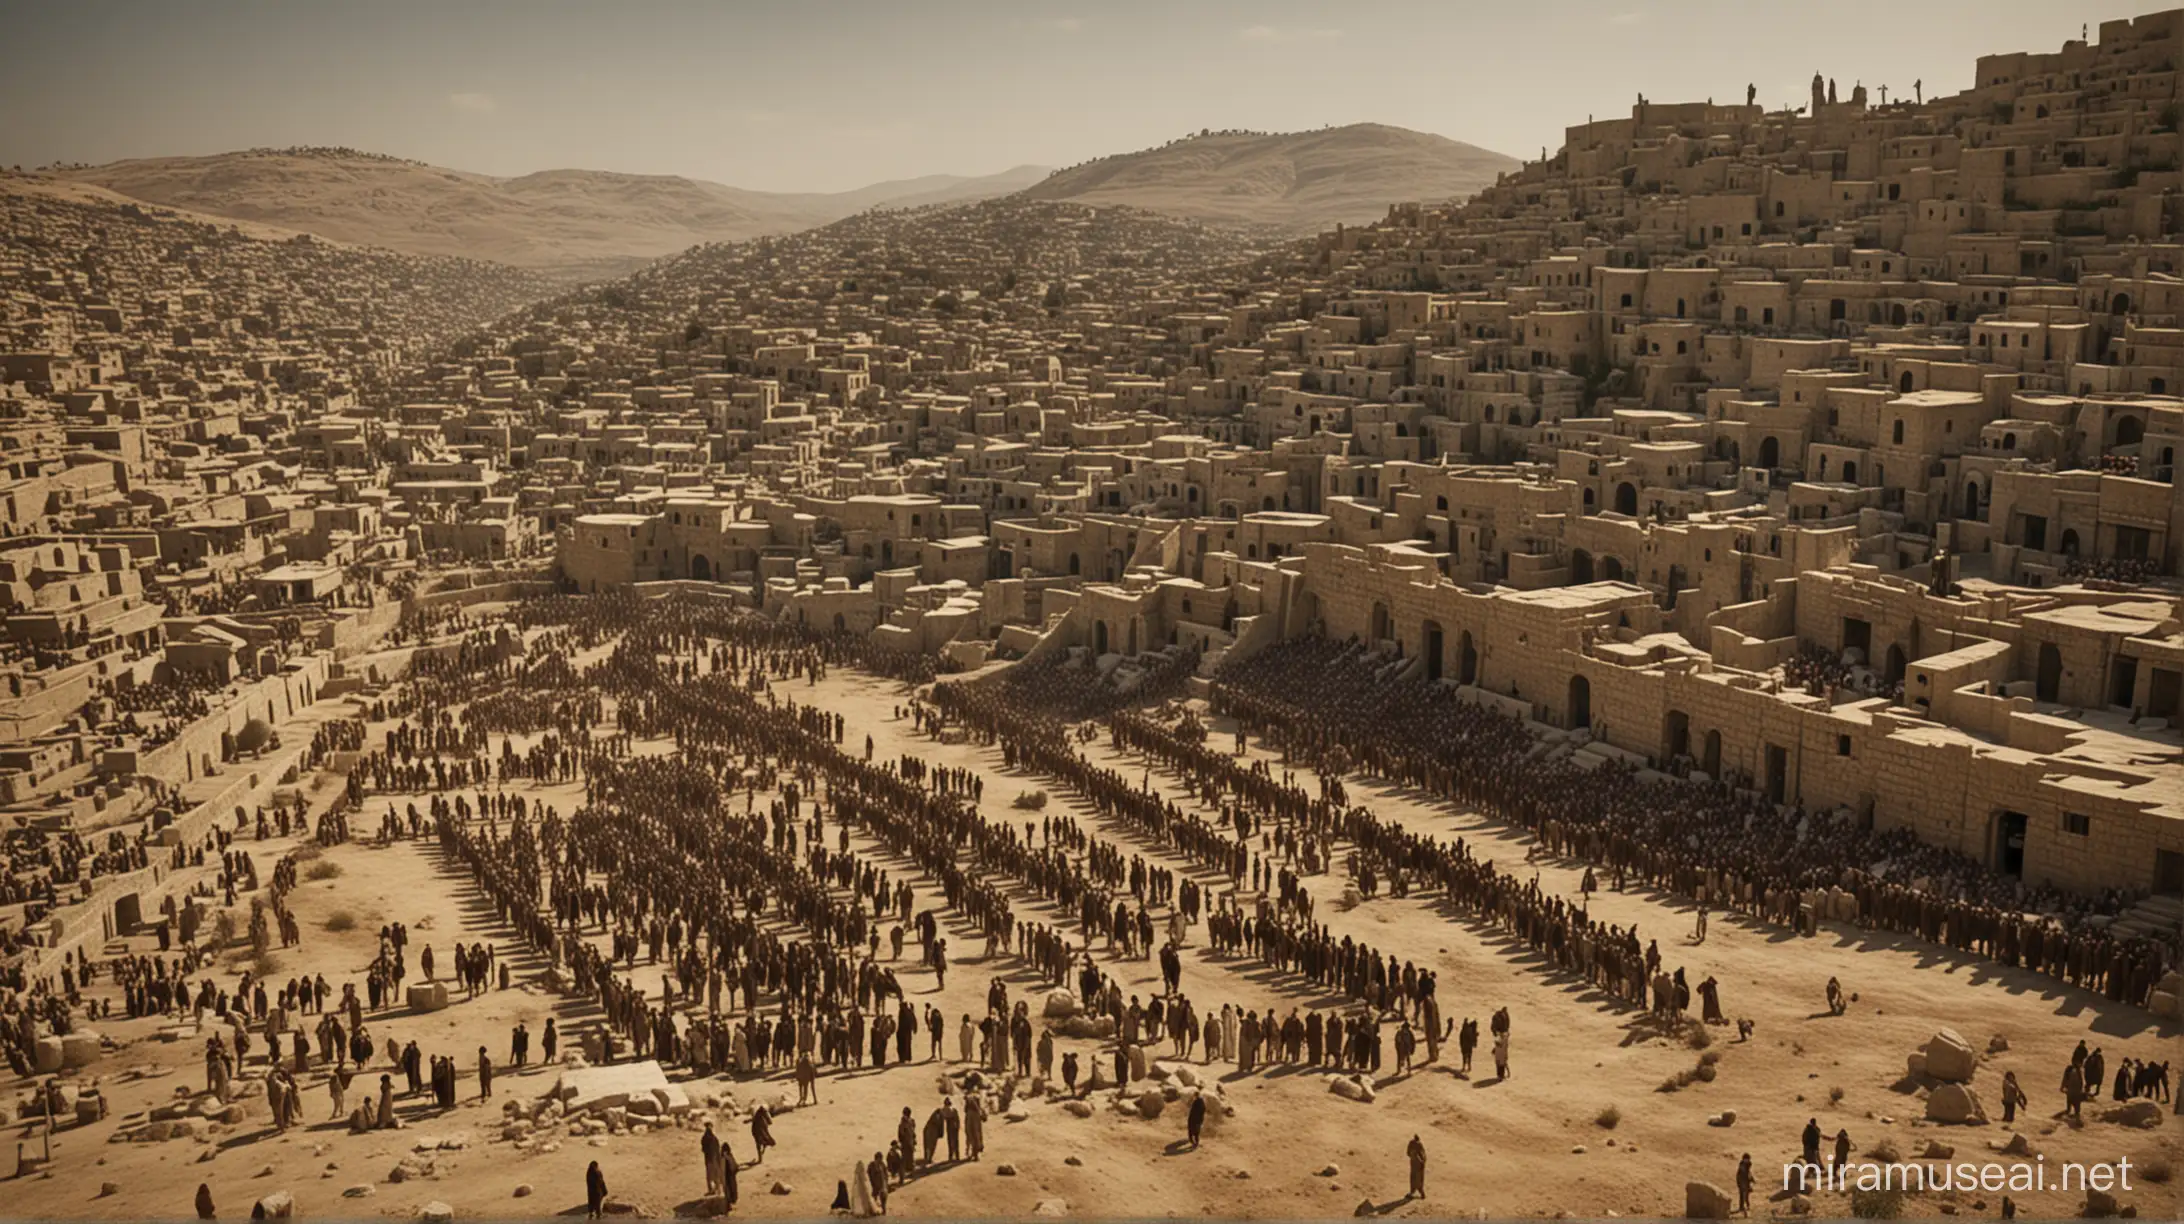 create an image of 1st century Palestine. 6k resolution, more realistic, based on the movie The Passion of the Christ.